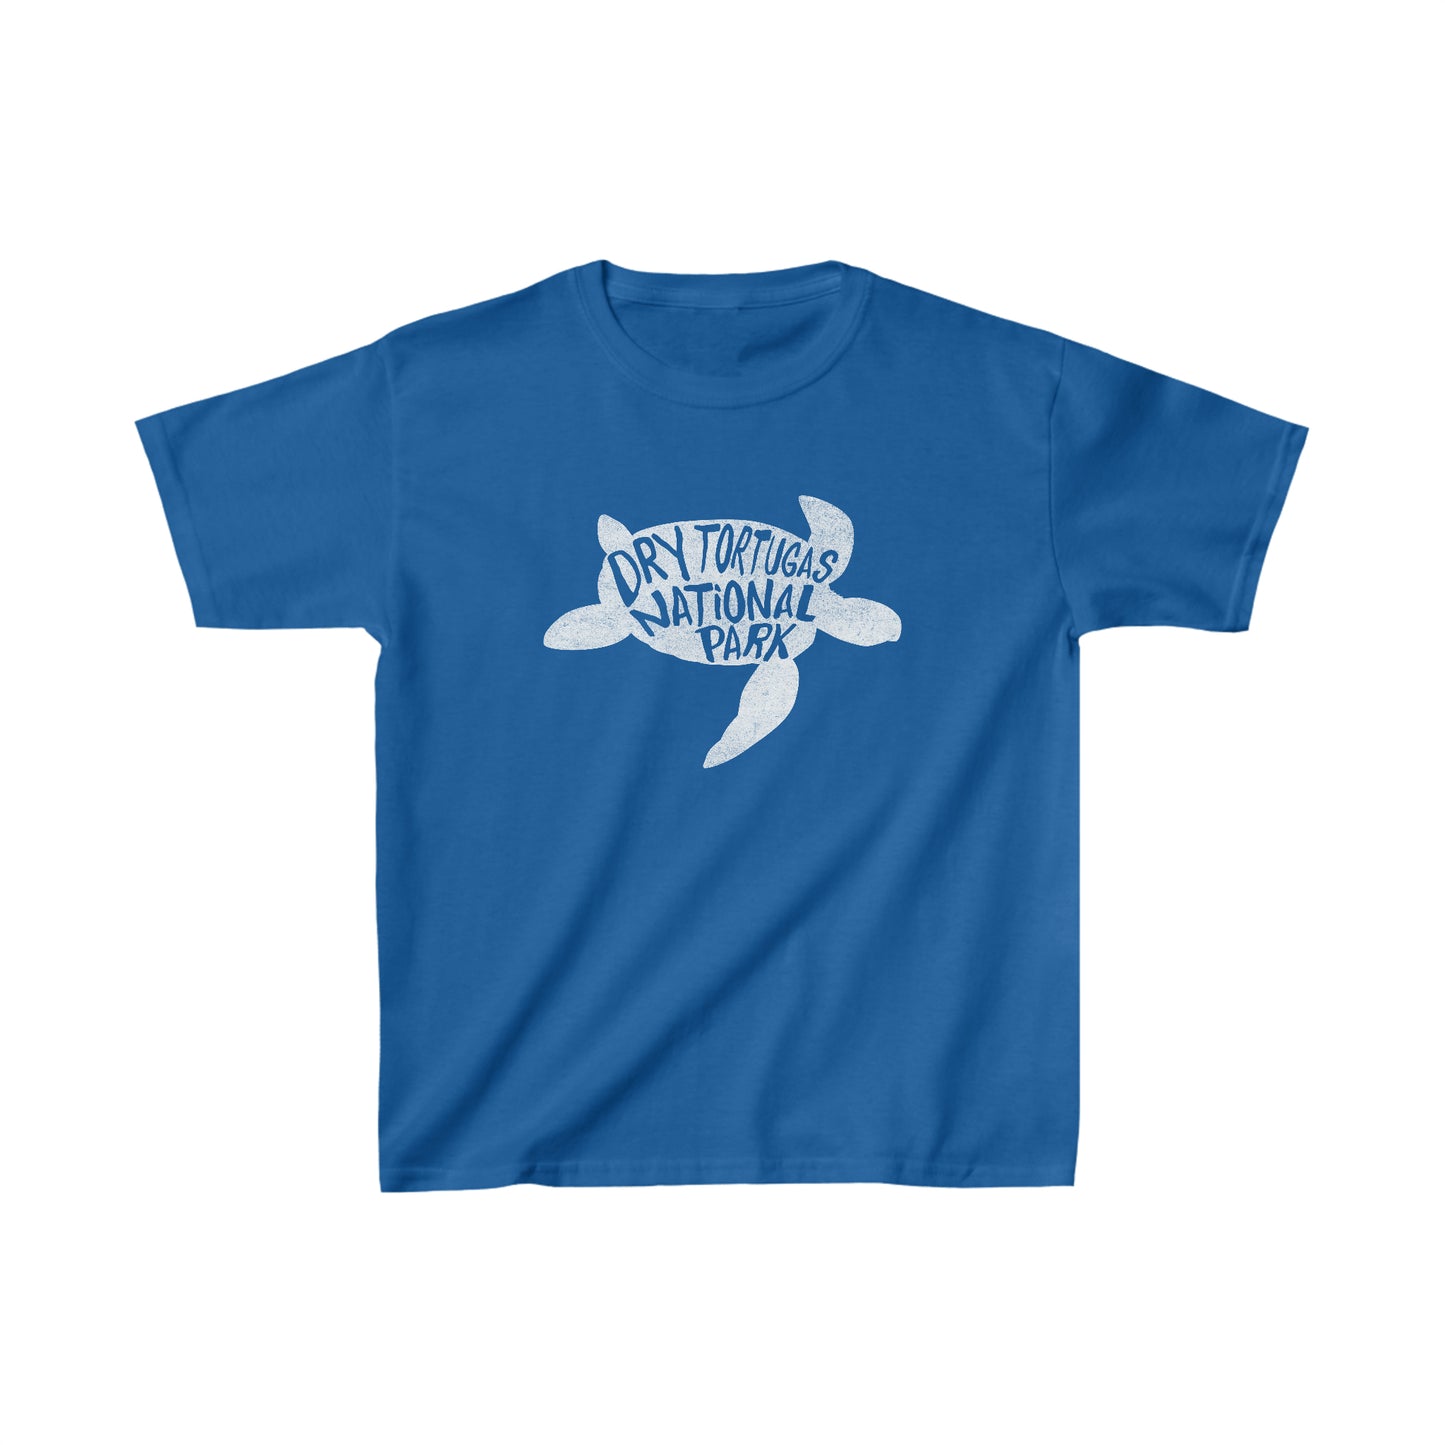 Dry Tortugas National Park Child T-Shirt - Turtle Chunky Text